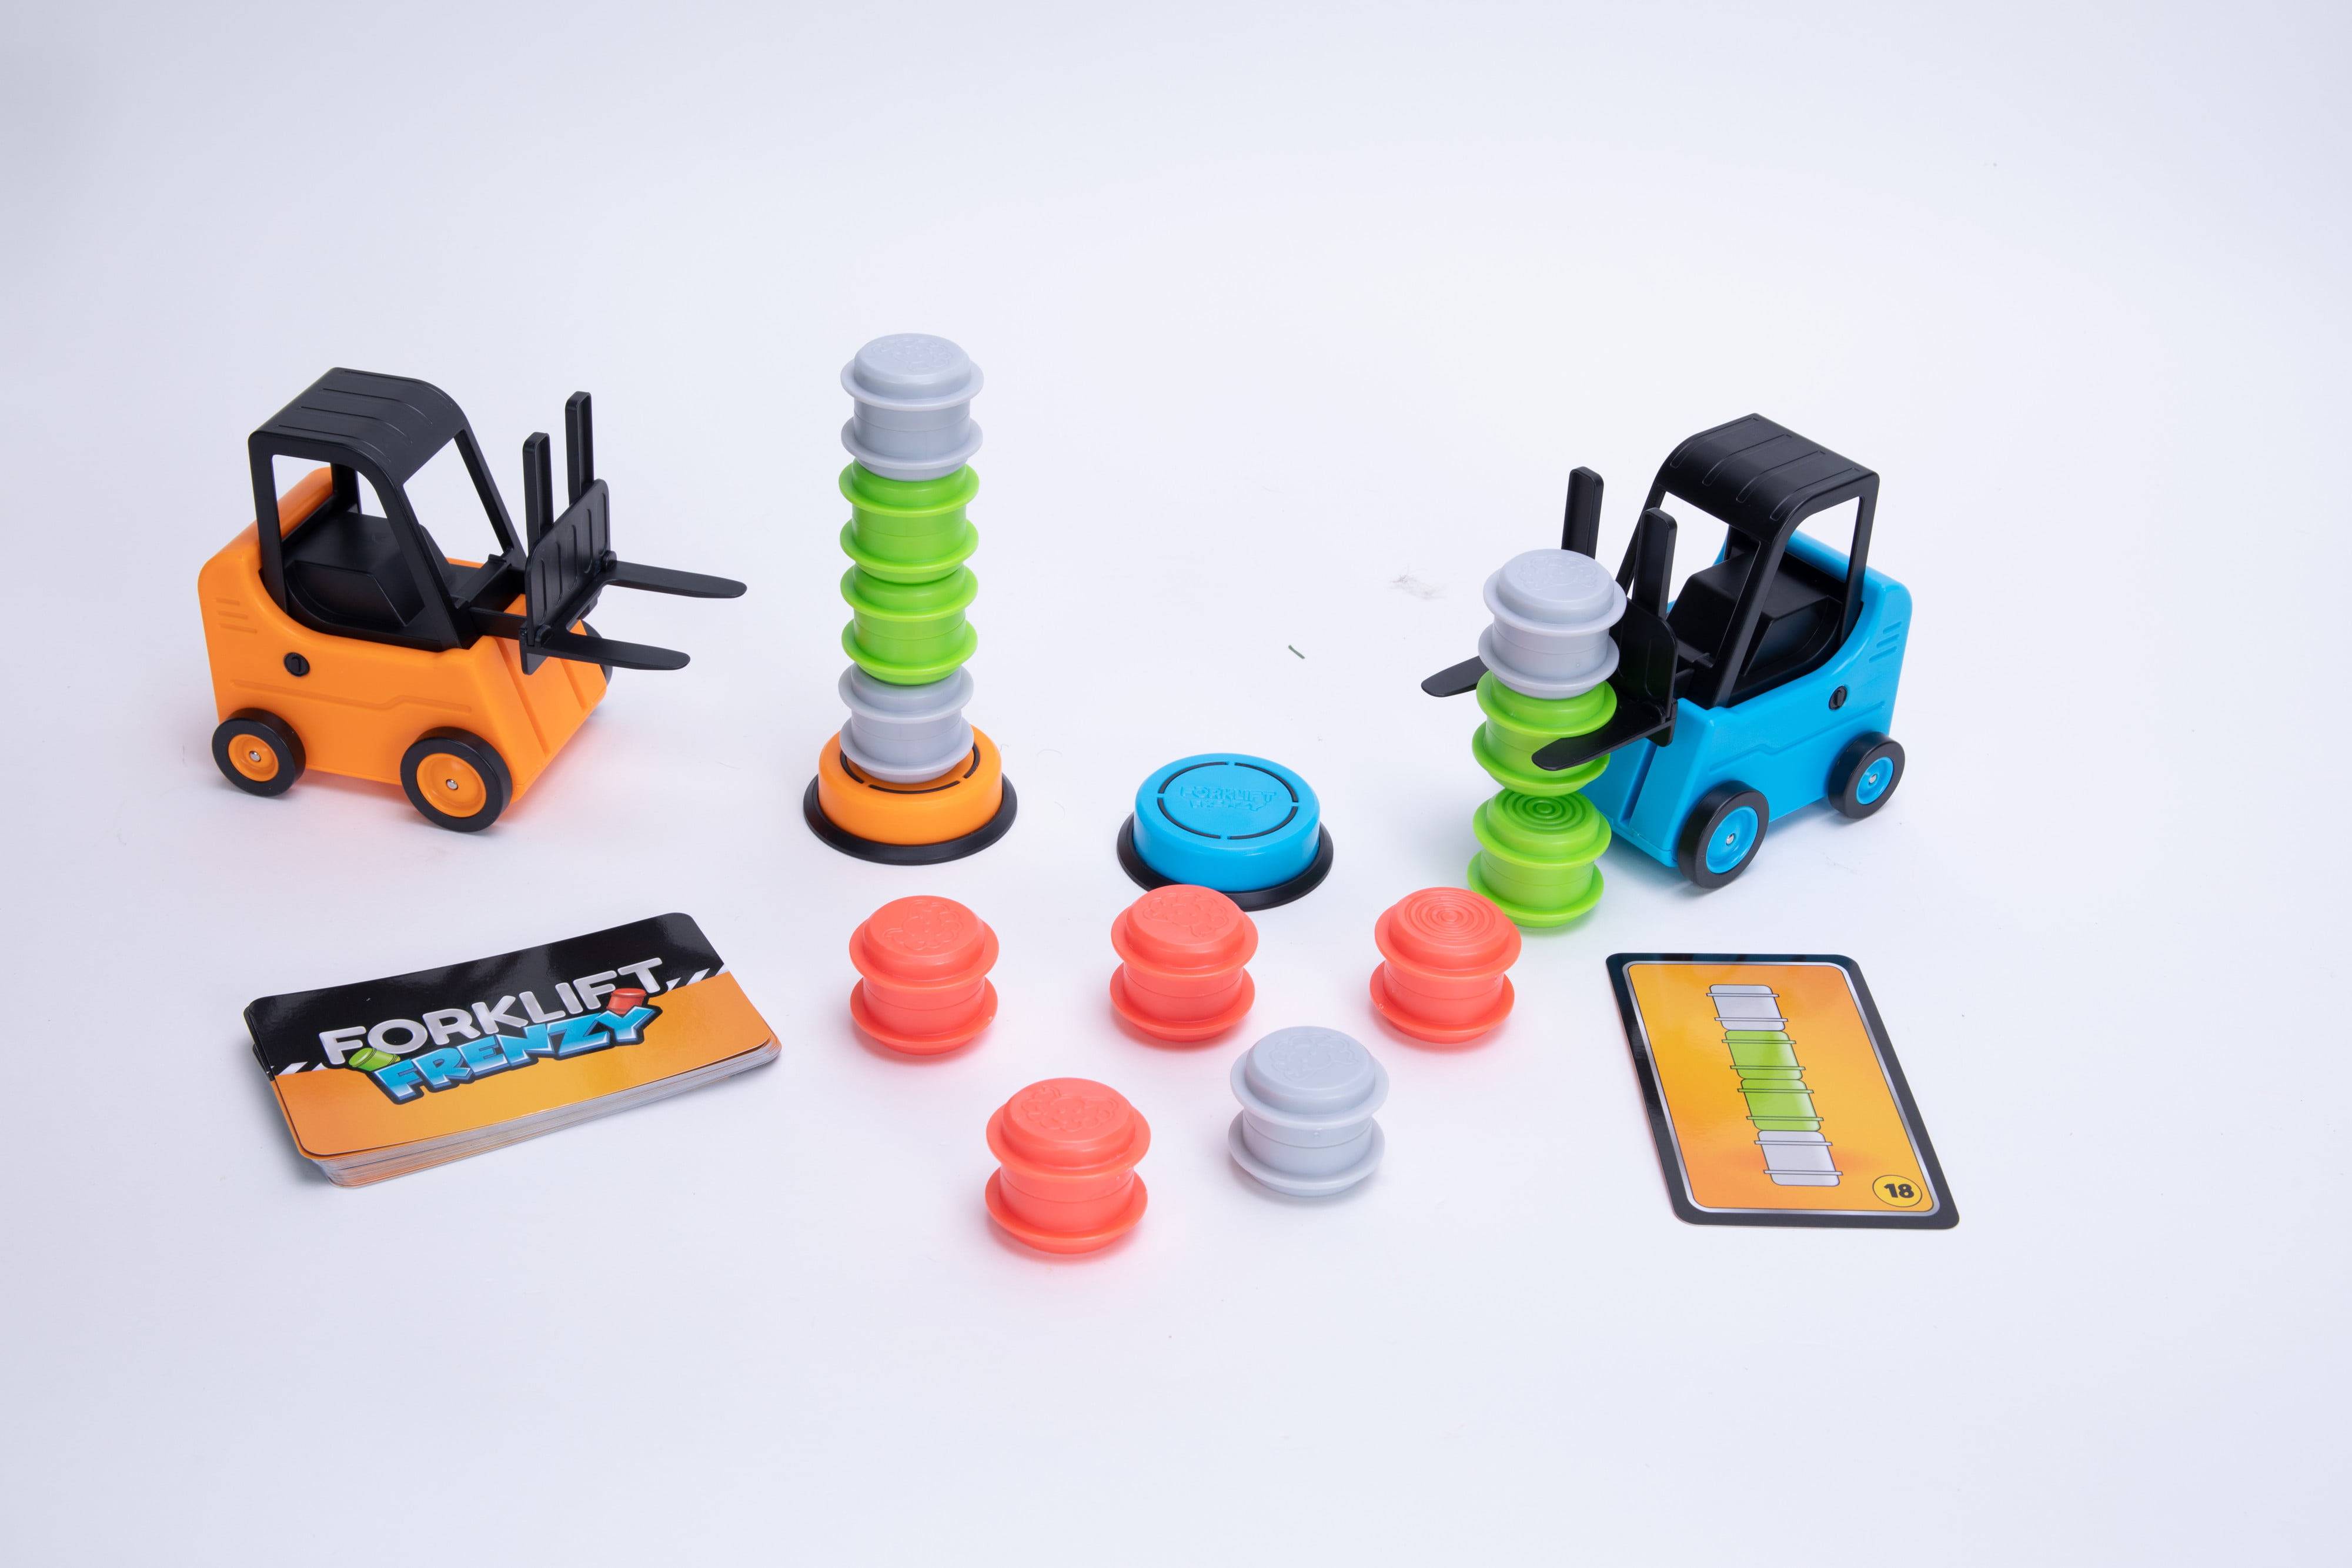 Forklift Frenzy - Best Games for Ages 8 to 11 - Fat Brain Toys